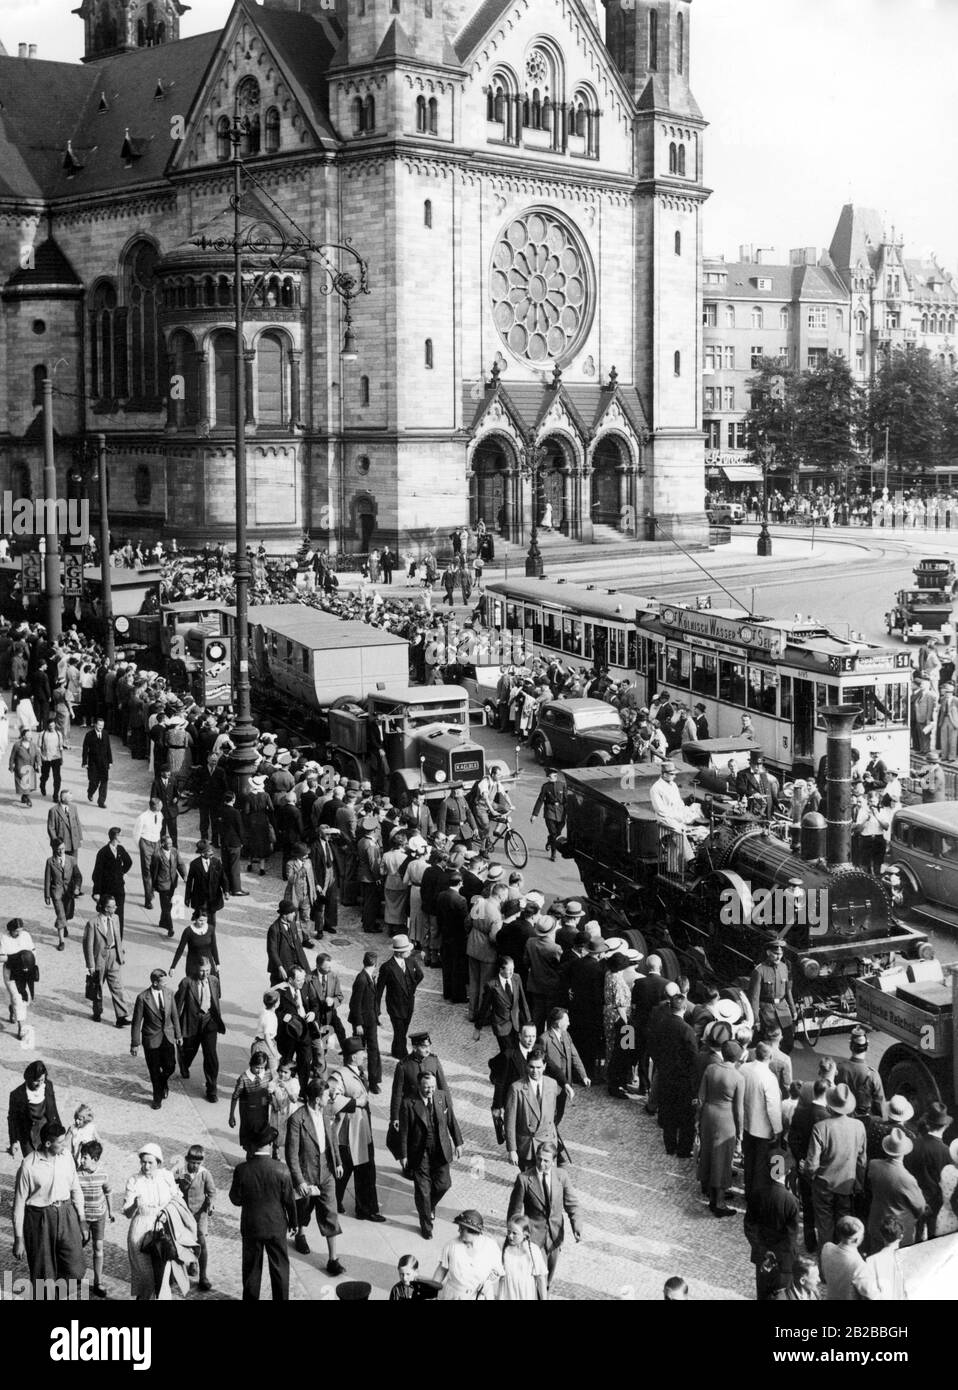 The replica of the first German locomotive, the 'Adler', rides through Berlin. It passes the Kaiser Wilhelm Memorial Church and will be on display at the exhibition 'Deutschland' in the Exhibition Halls on Kaiserdamm. Many people line the roadside and wave to the locomotive. A tram runs in the background. Stock Photo